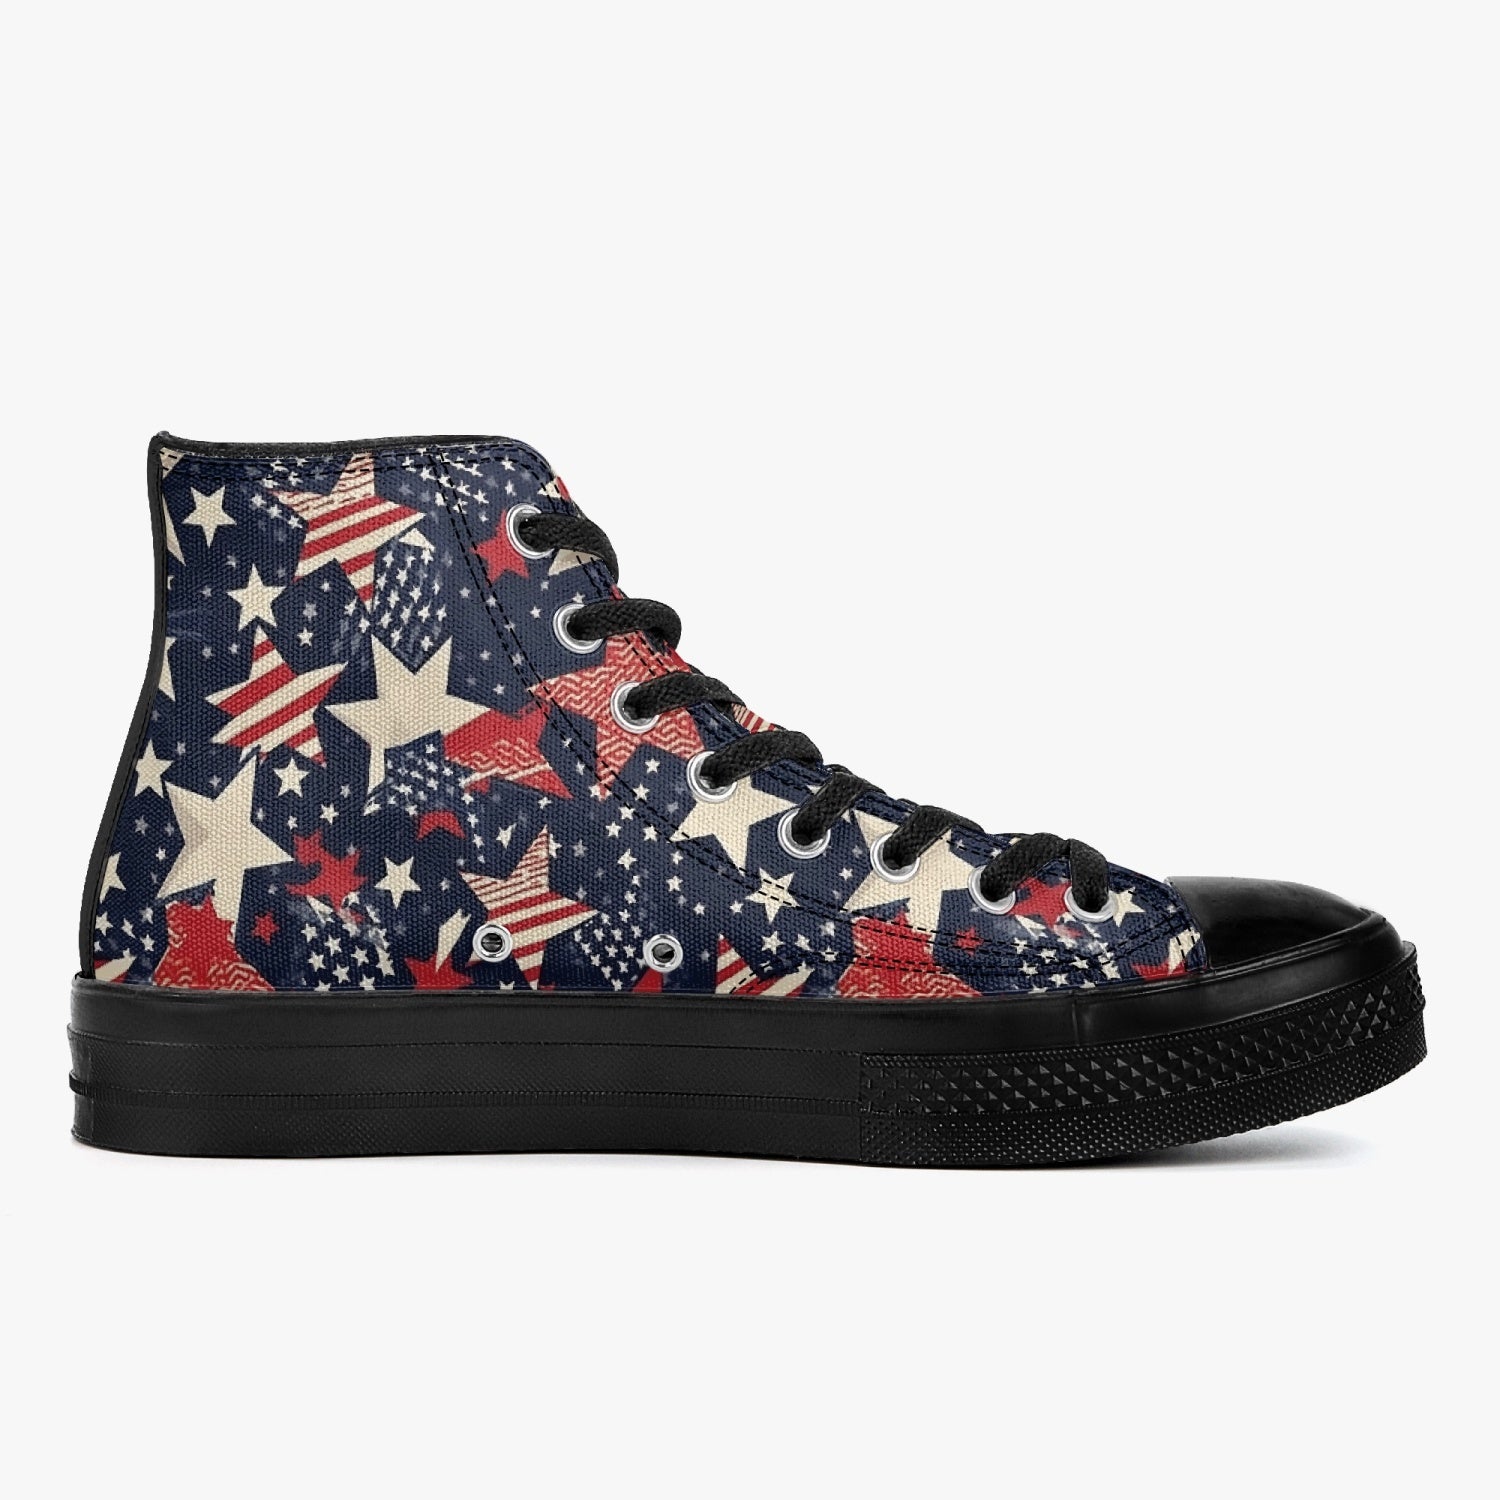 Red White Blue Stars High Top Shoes Sneakers, Men Women America USA Flag Stripes Black Lace Up Footwear Rave Canvas Streetwear Designer Starcove Fashion